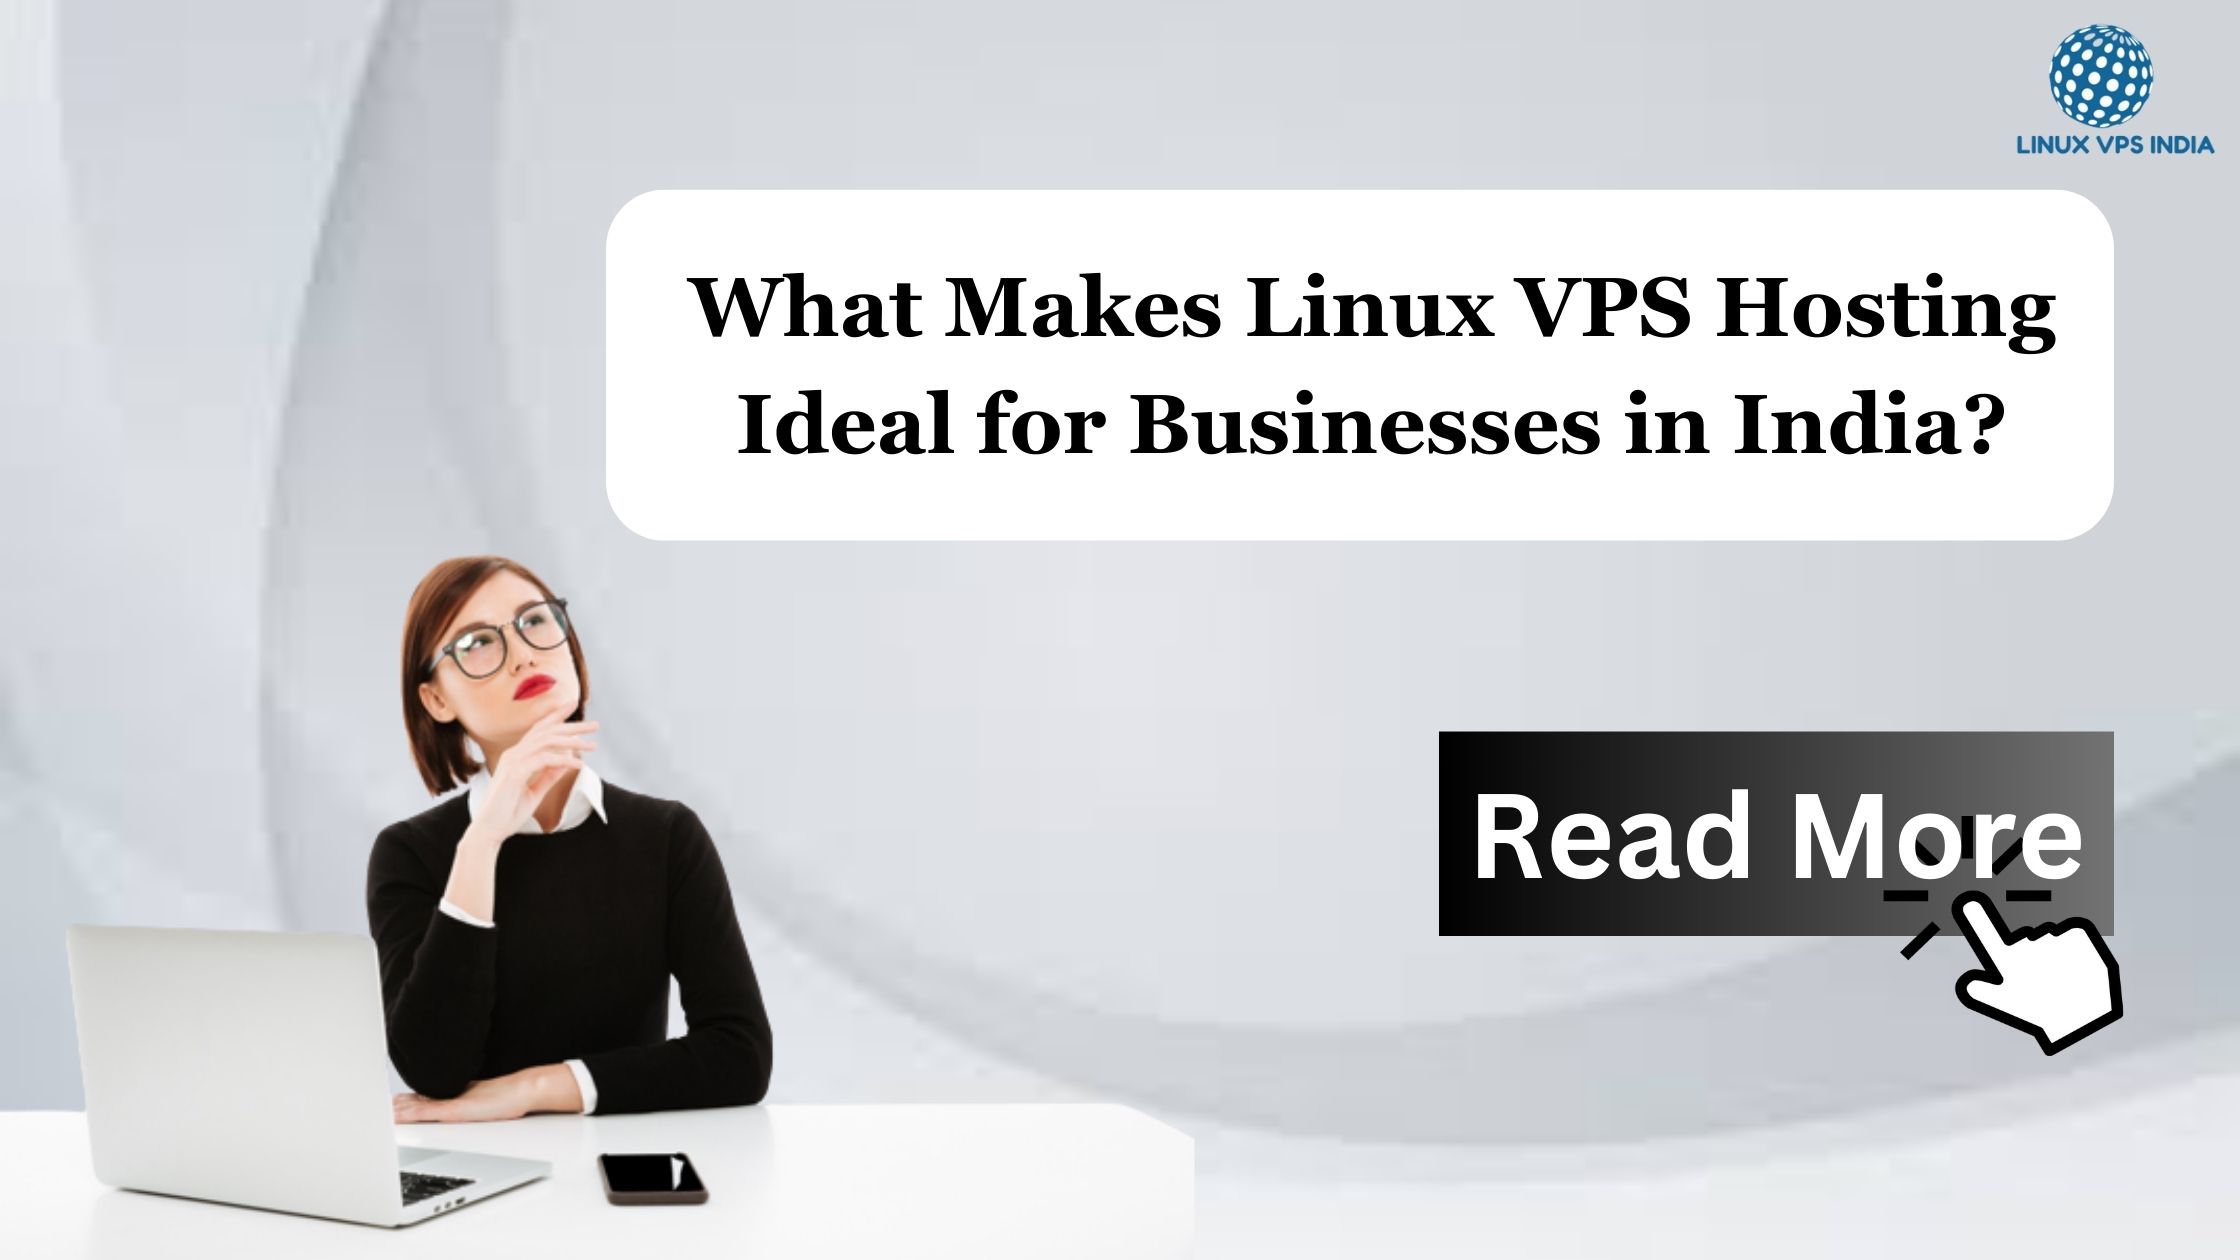 What Makes Linux VPS Hosting Ideal for Businesses in India?